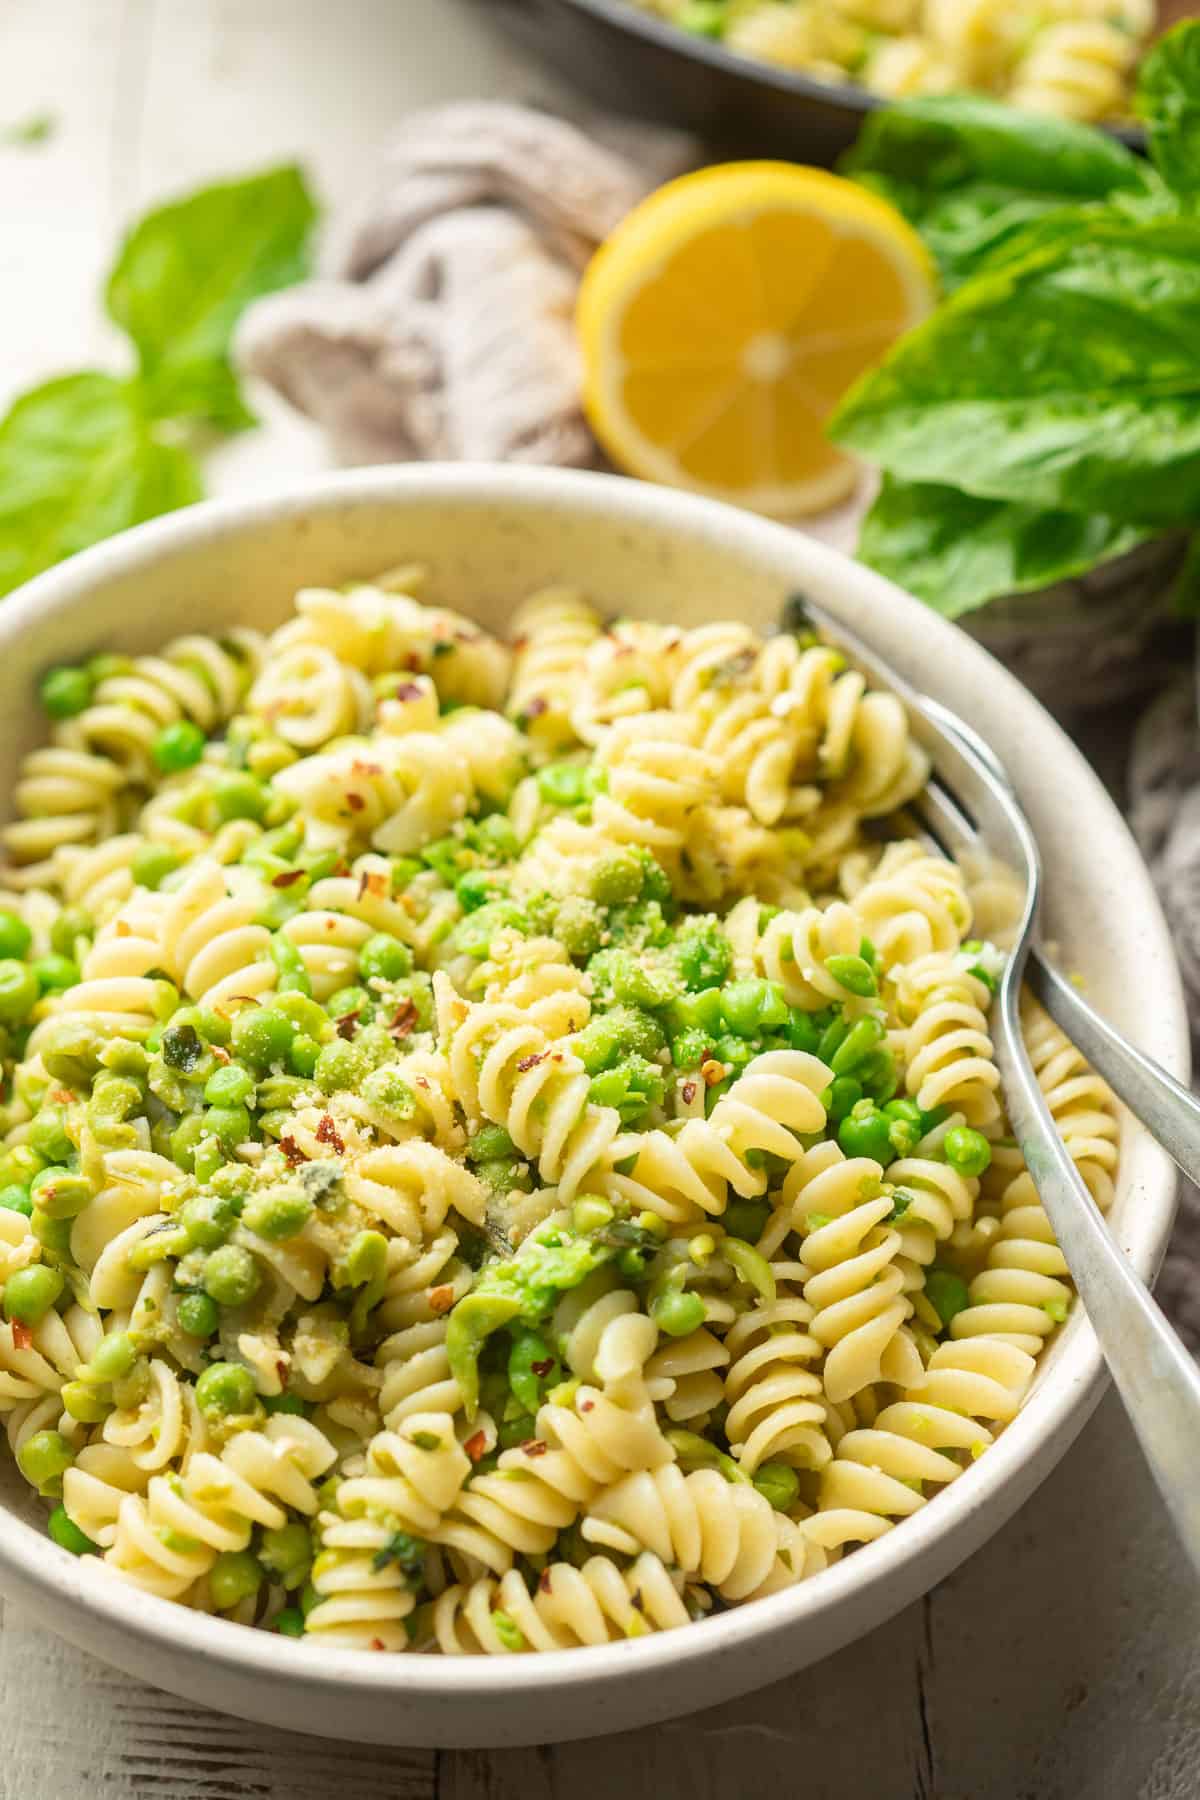 Bowl of pasta and peas with lemon half, fresh basil, and a skillet in the background.